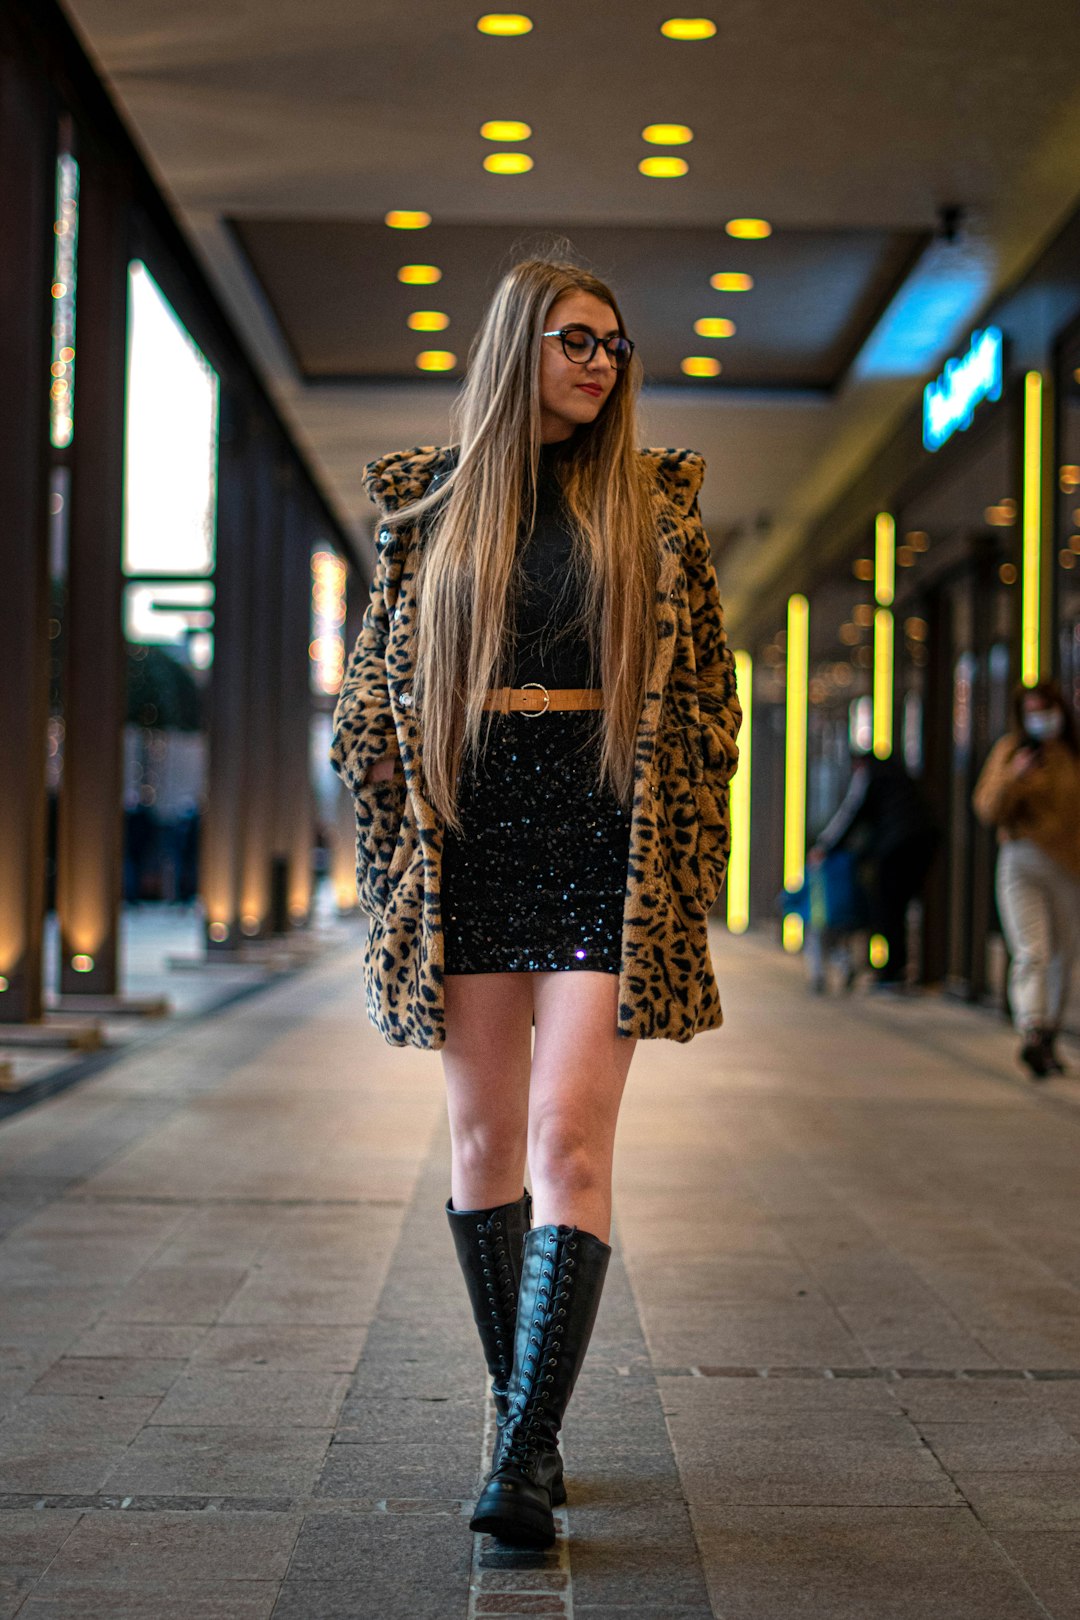 woman in brown leopard coat and black leather boots walking on sidewalk during daytime